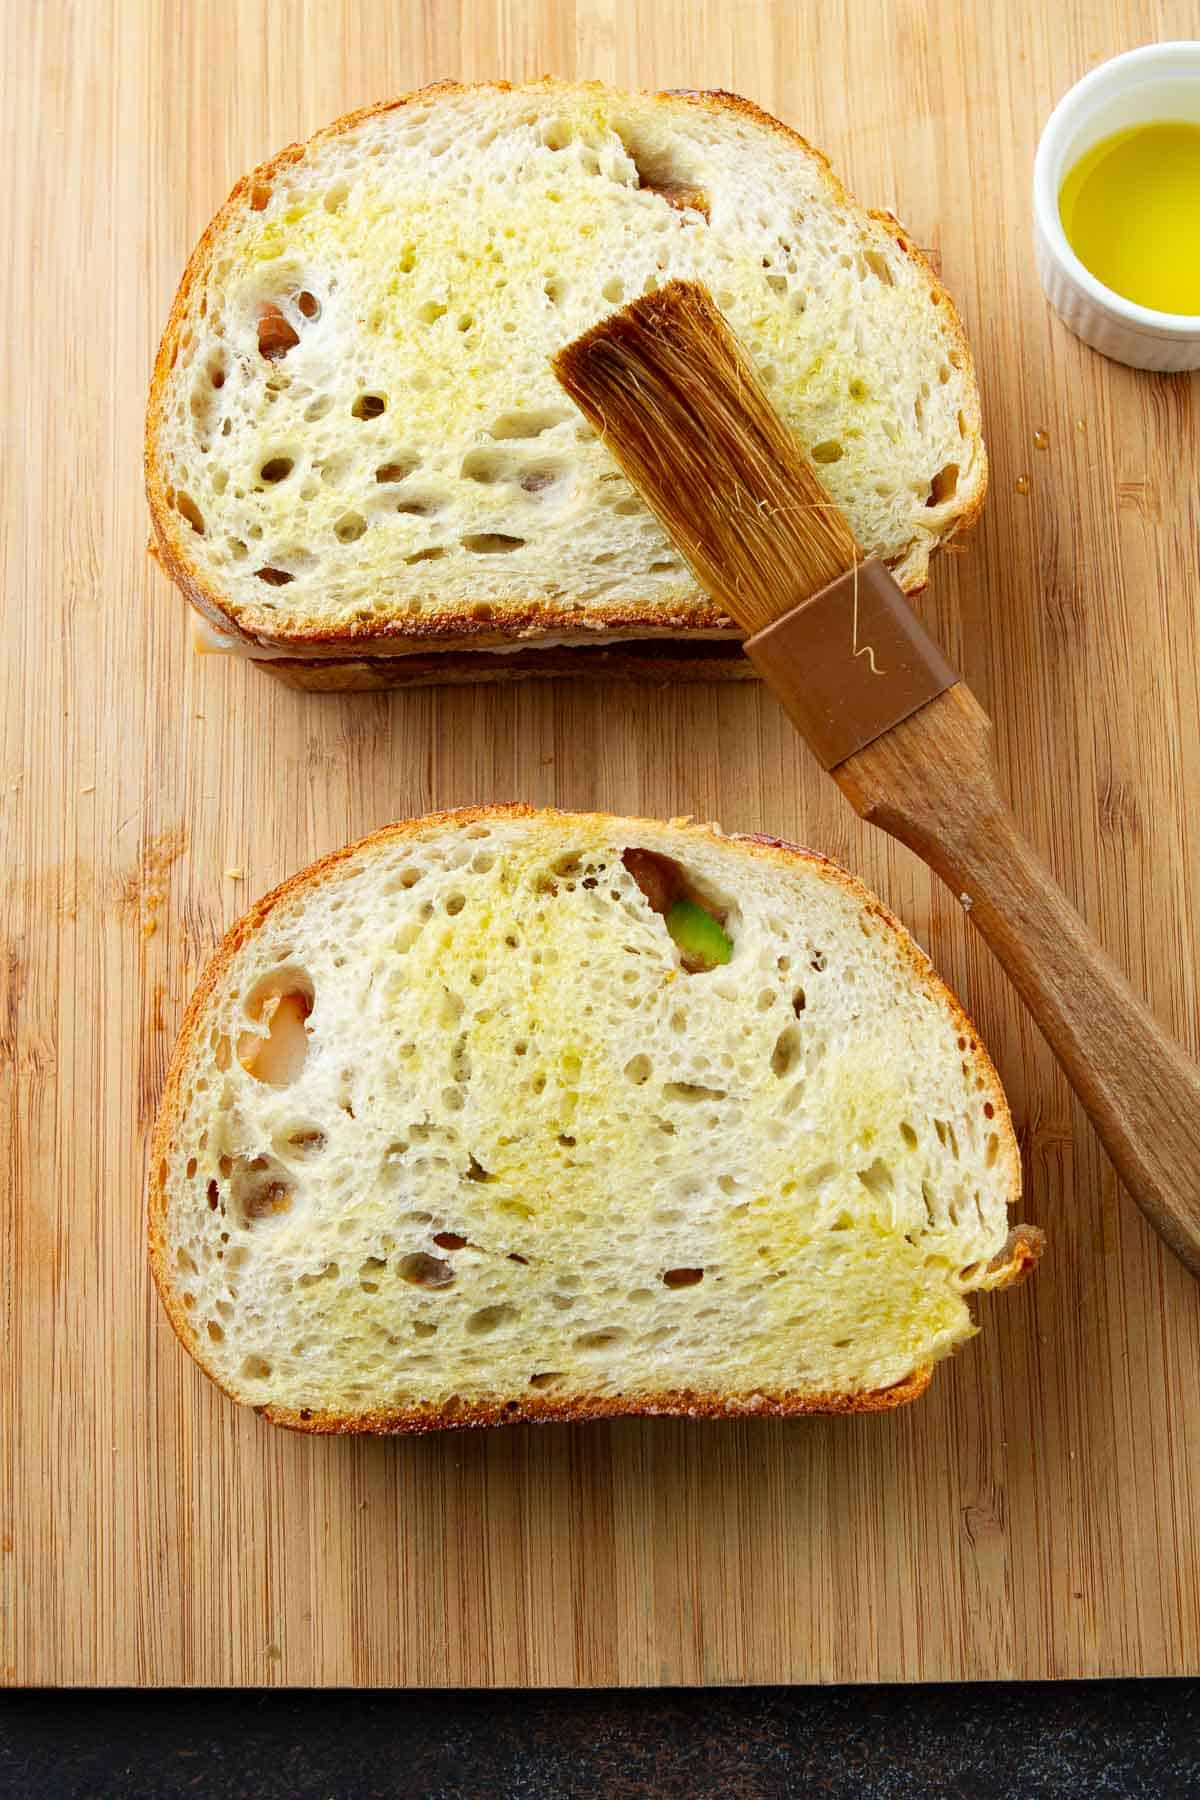 Sourdough sandwiches brushed with olive oil.